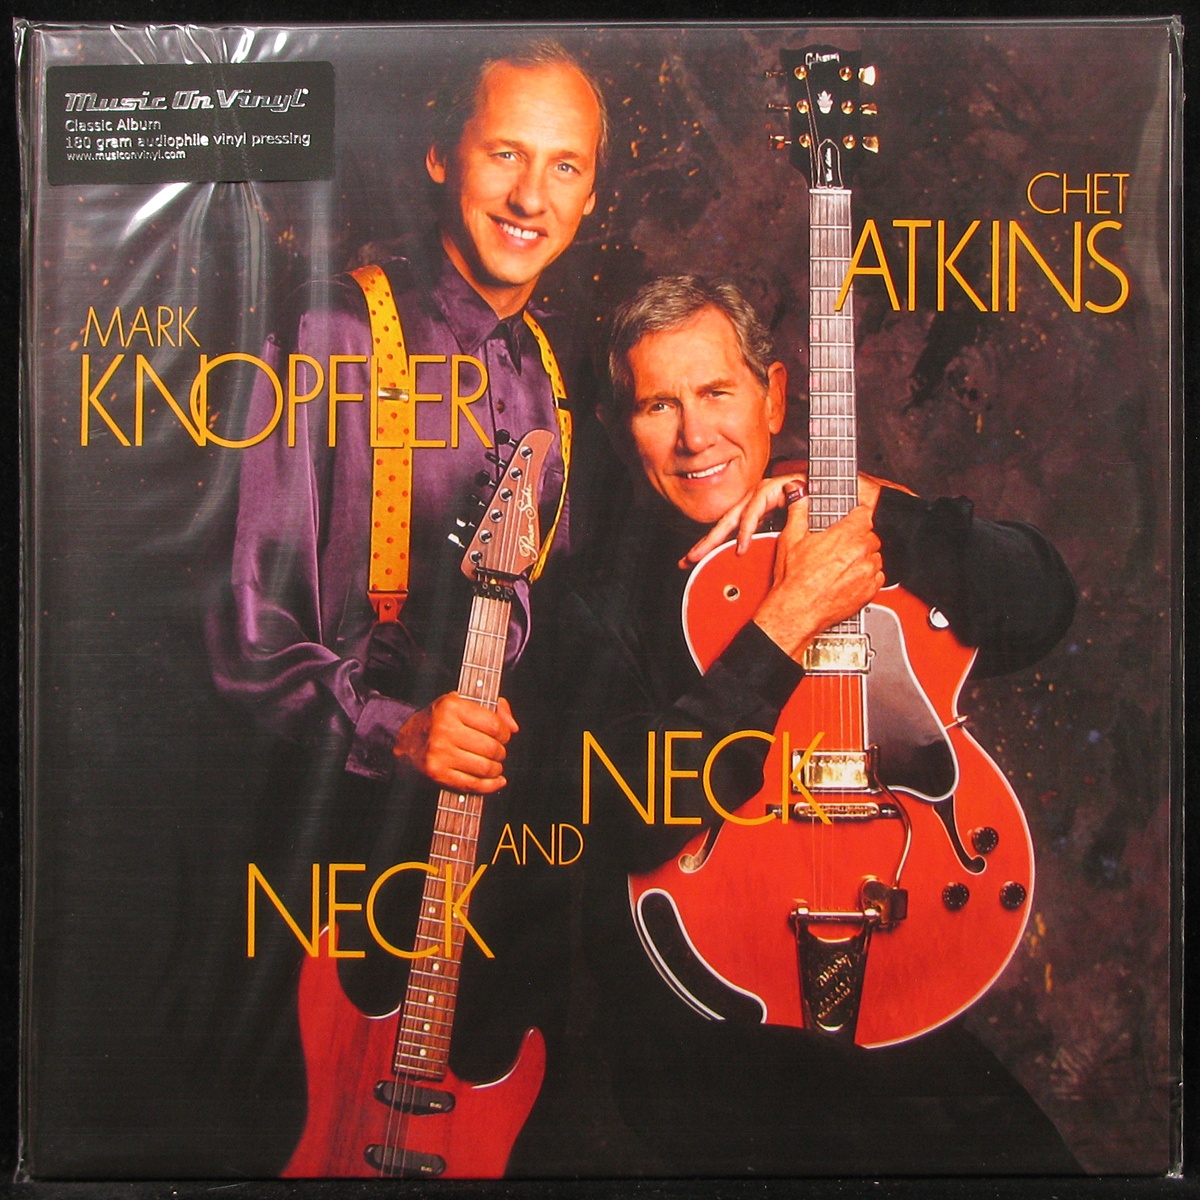 LP Mark Knopfler / Chet Atkins — Neck And Neck фото